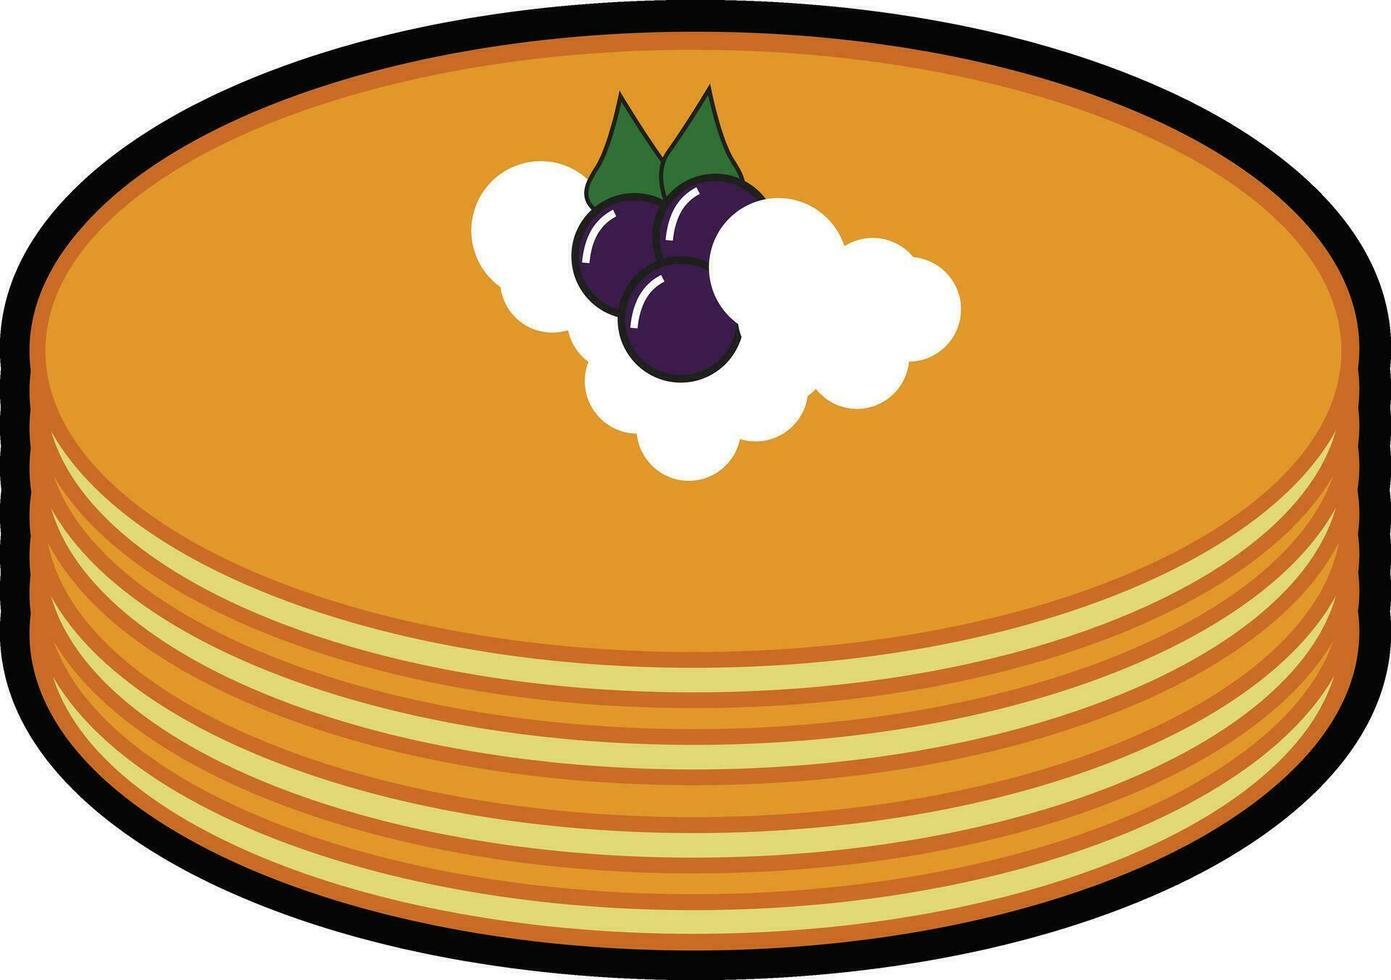 Pancake day  vector icon free download